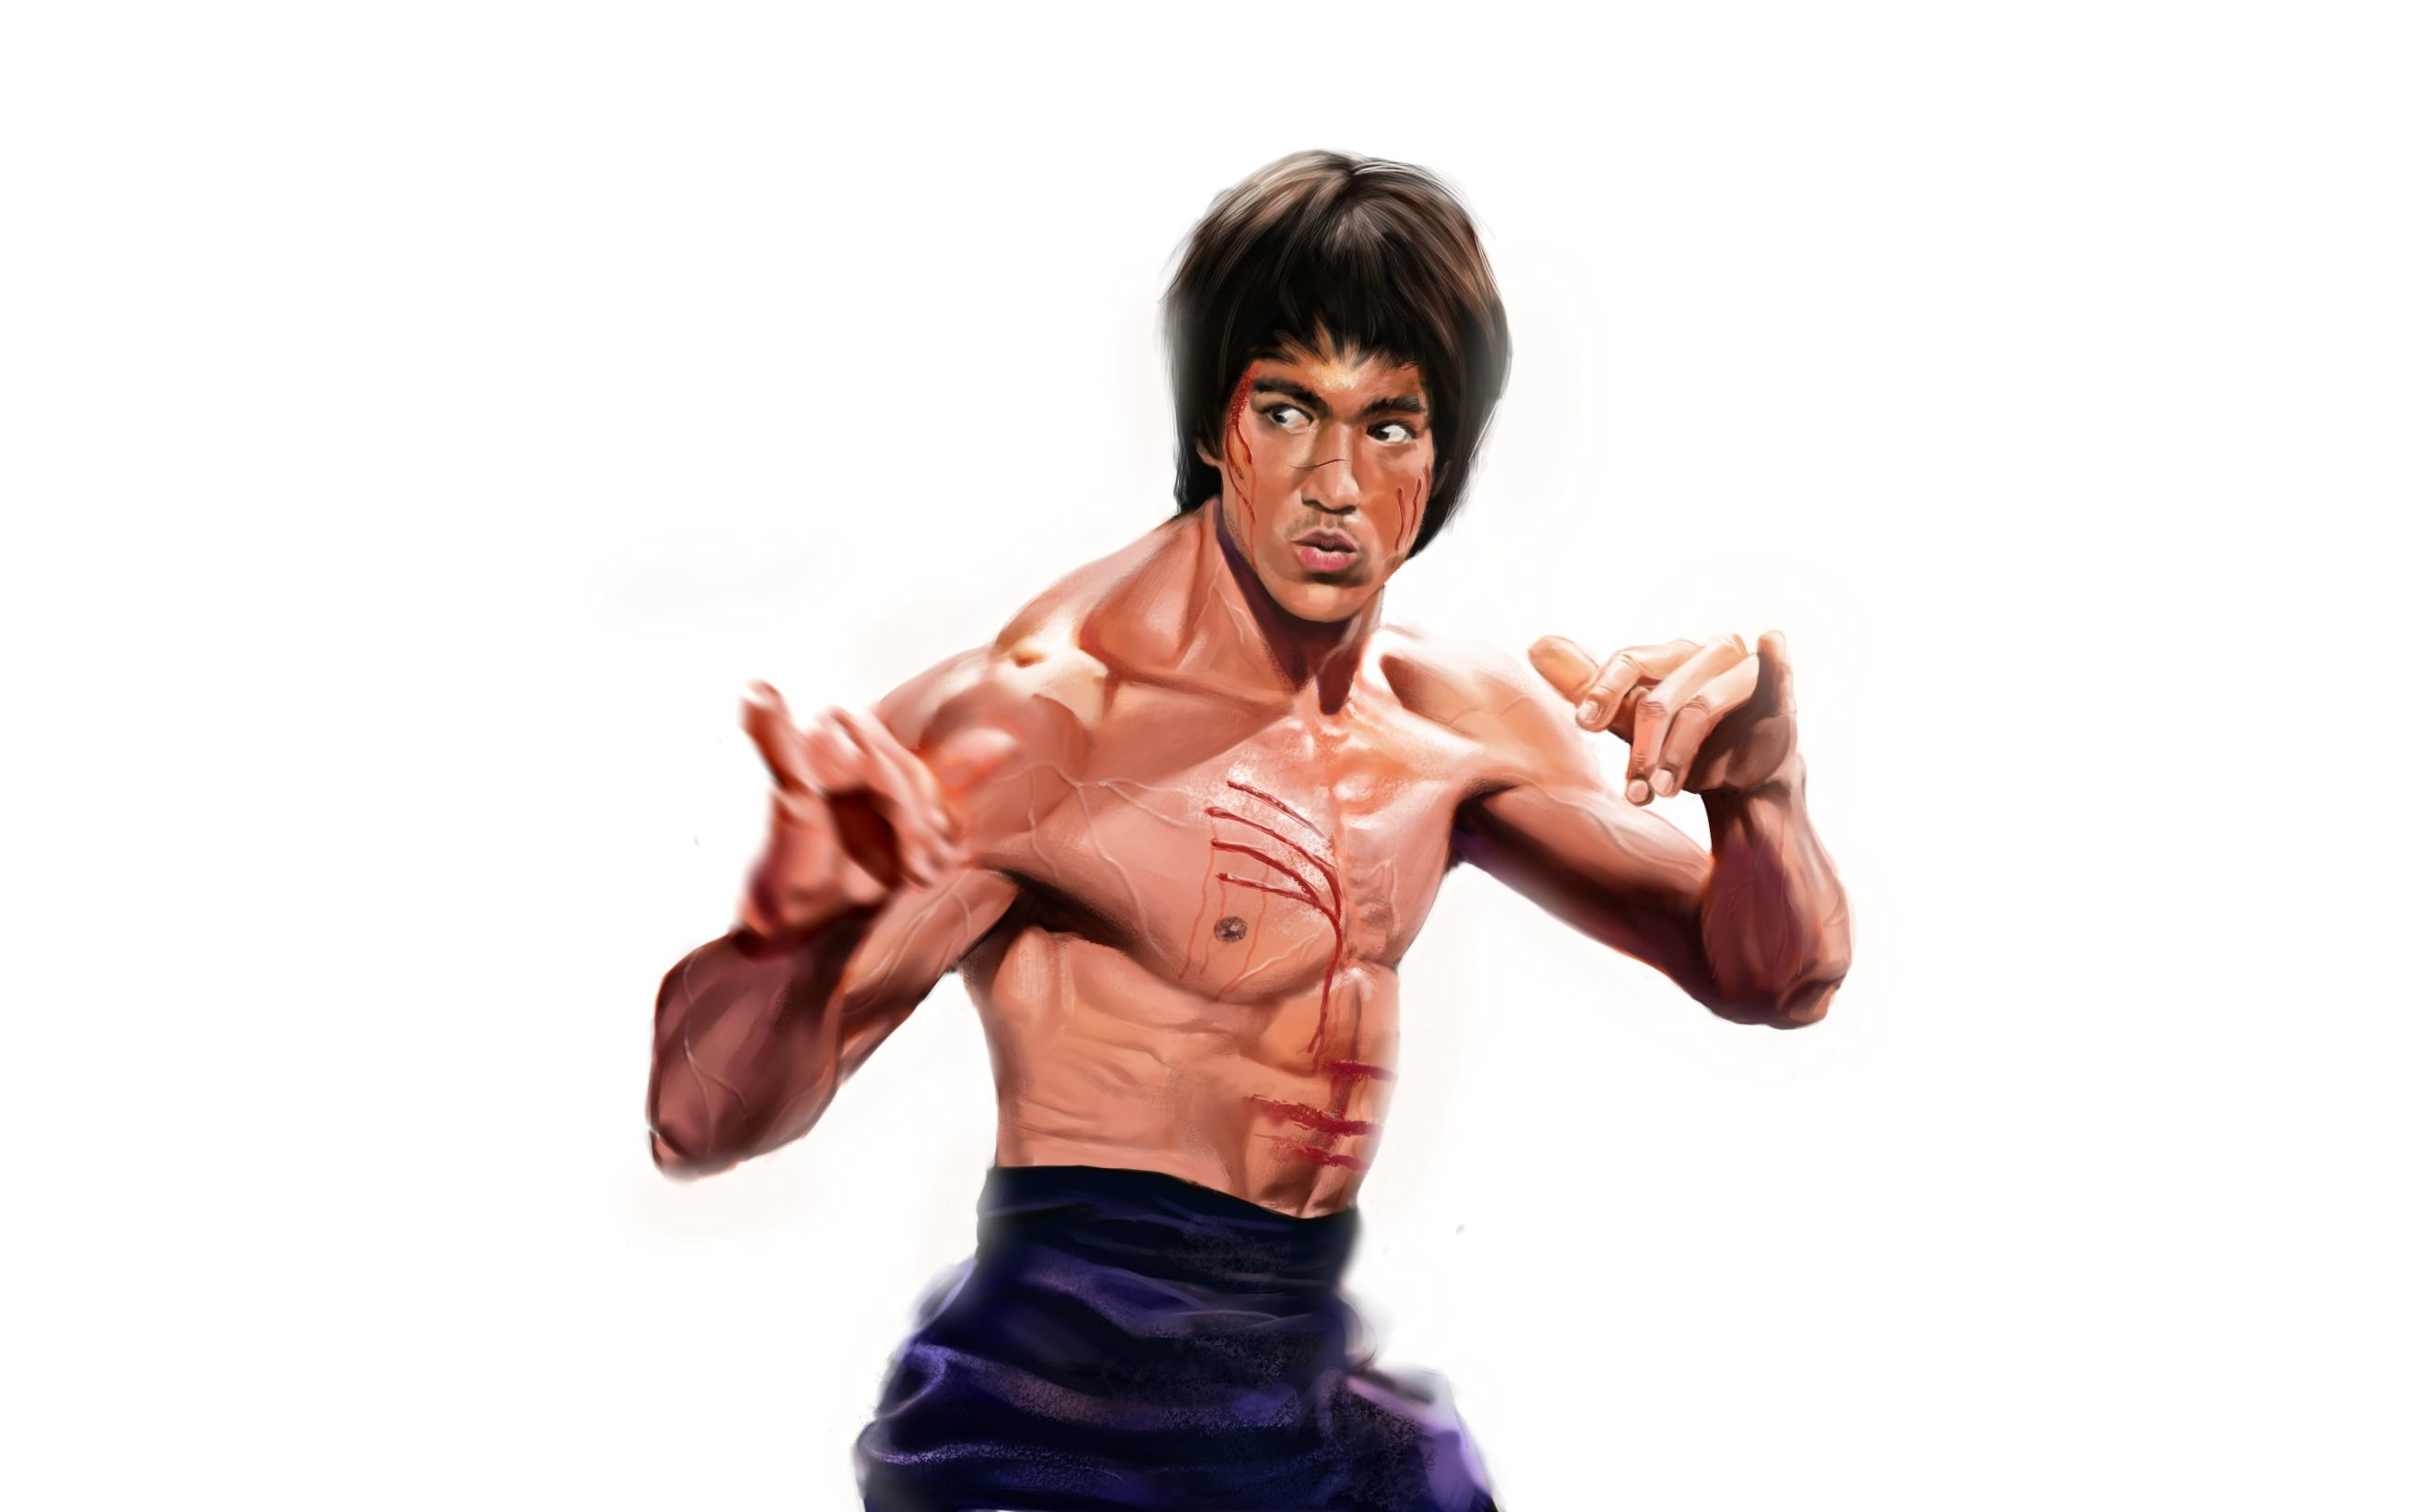 Bruce Lee wallpapers for desktop, download free Bruce Lee pictures and  backgrounds for PC 